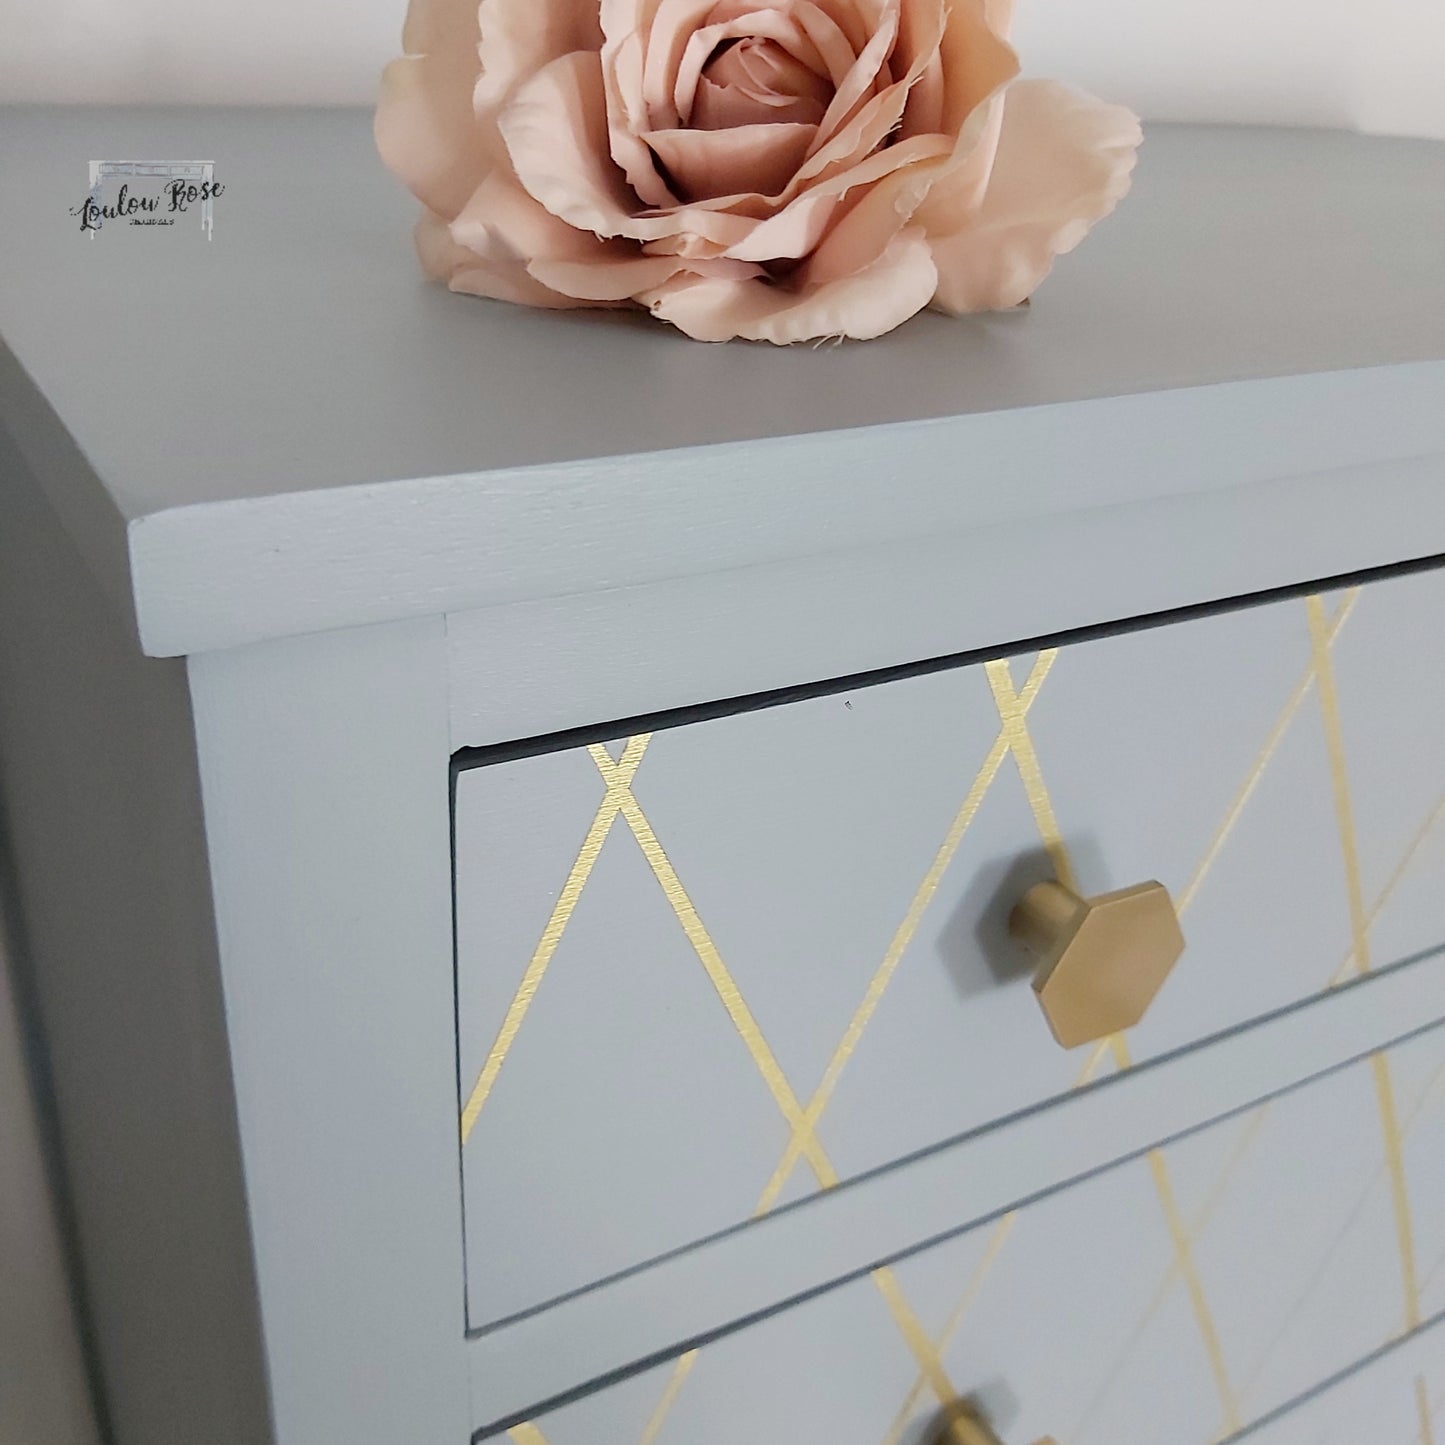 Chest of Drawers in Blue and Gold, Vintage with Queen Anne Legs and Geometric Diamond Design